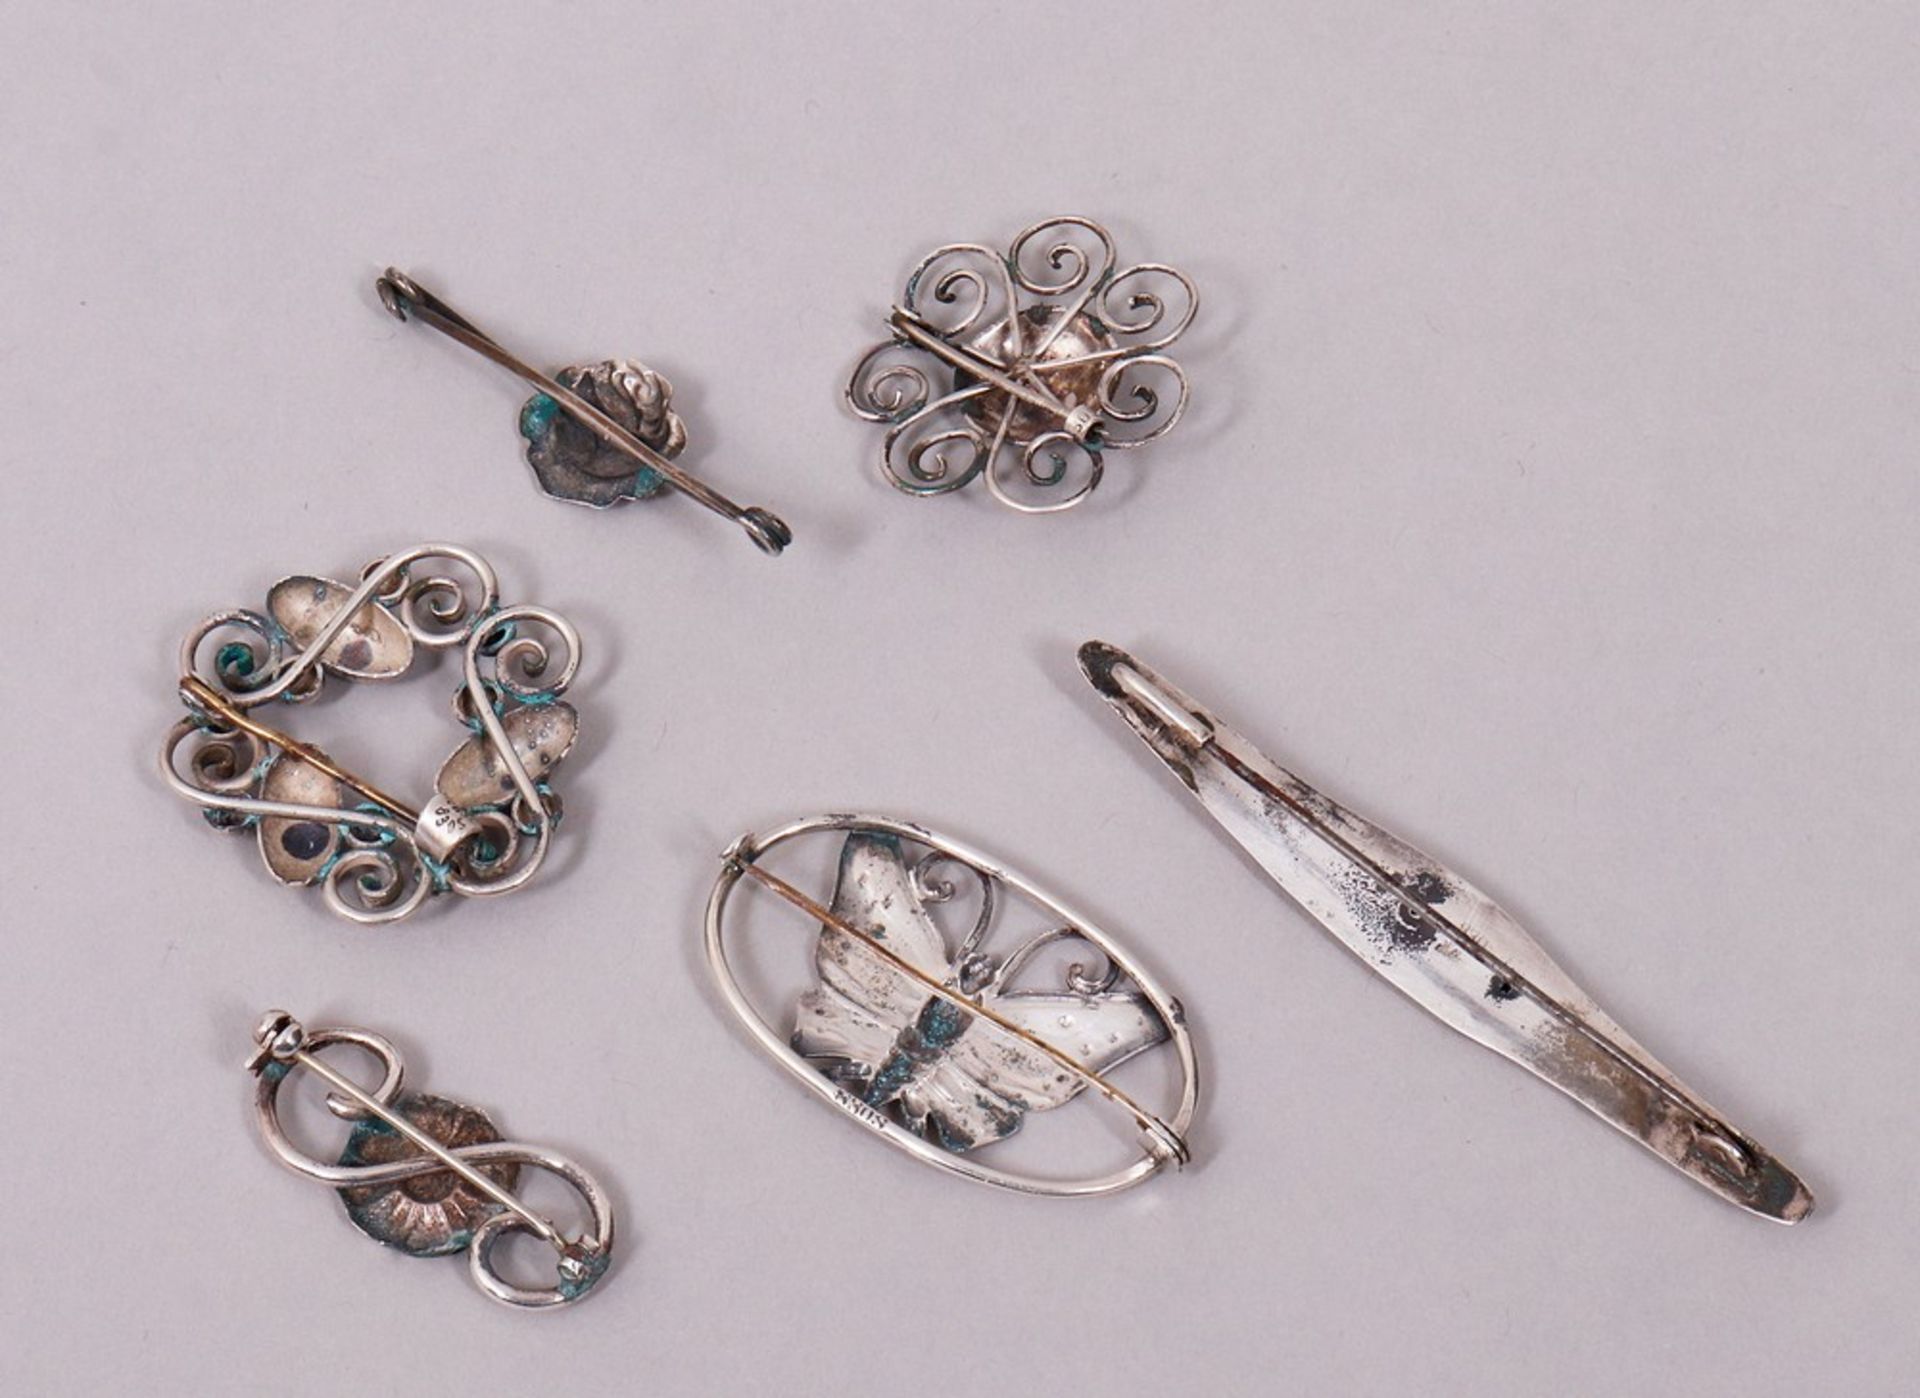 6 brooches, 830 silver, Denmark, 20th C. - Image 4 of 7